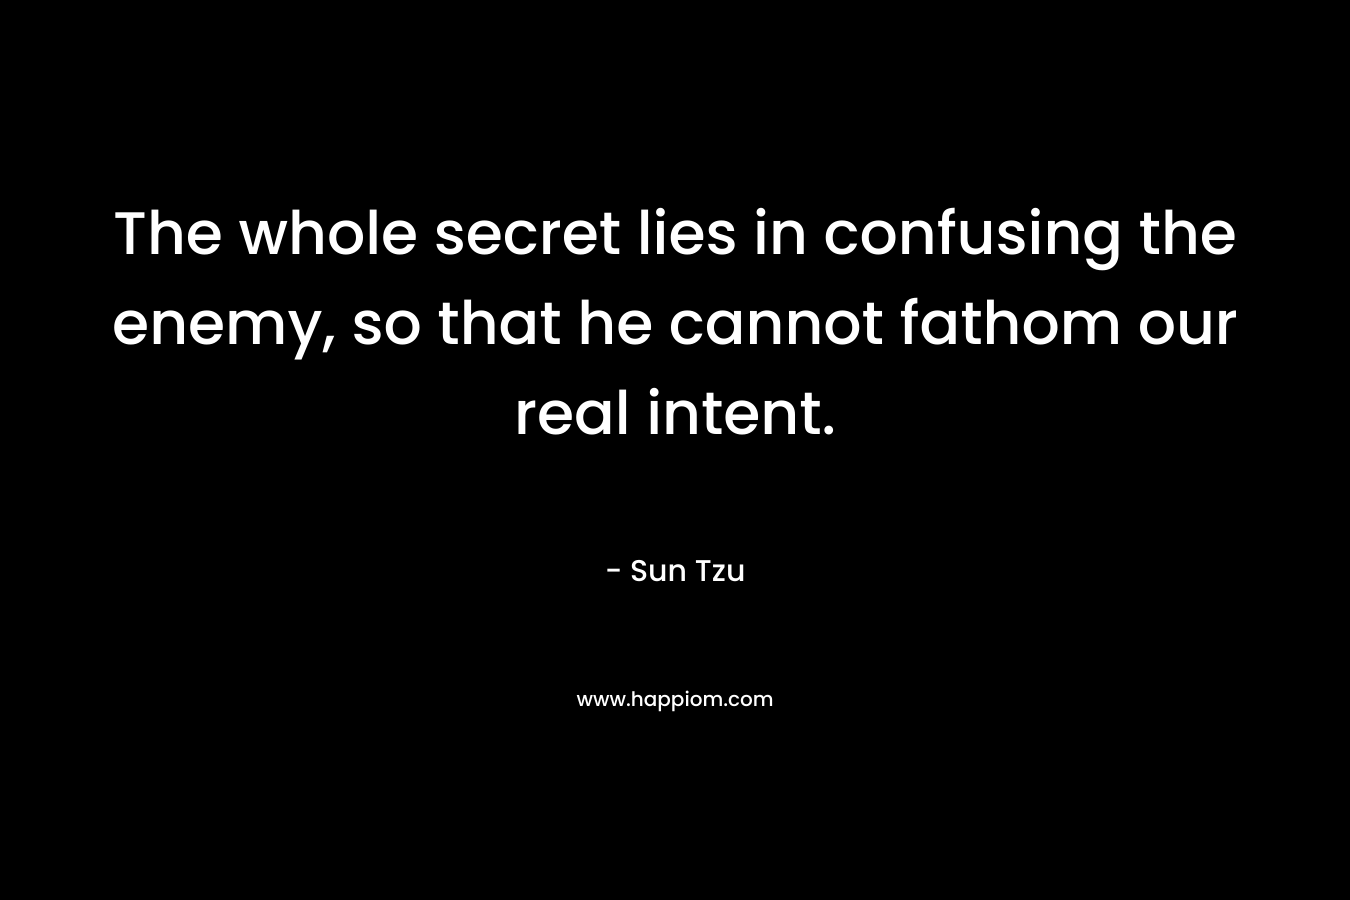 The whole secret lies in confusing the enemy, so that he cannot fathom our real intent. – Sun Tzu